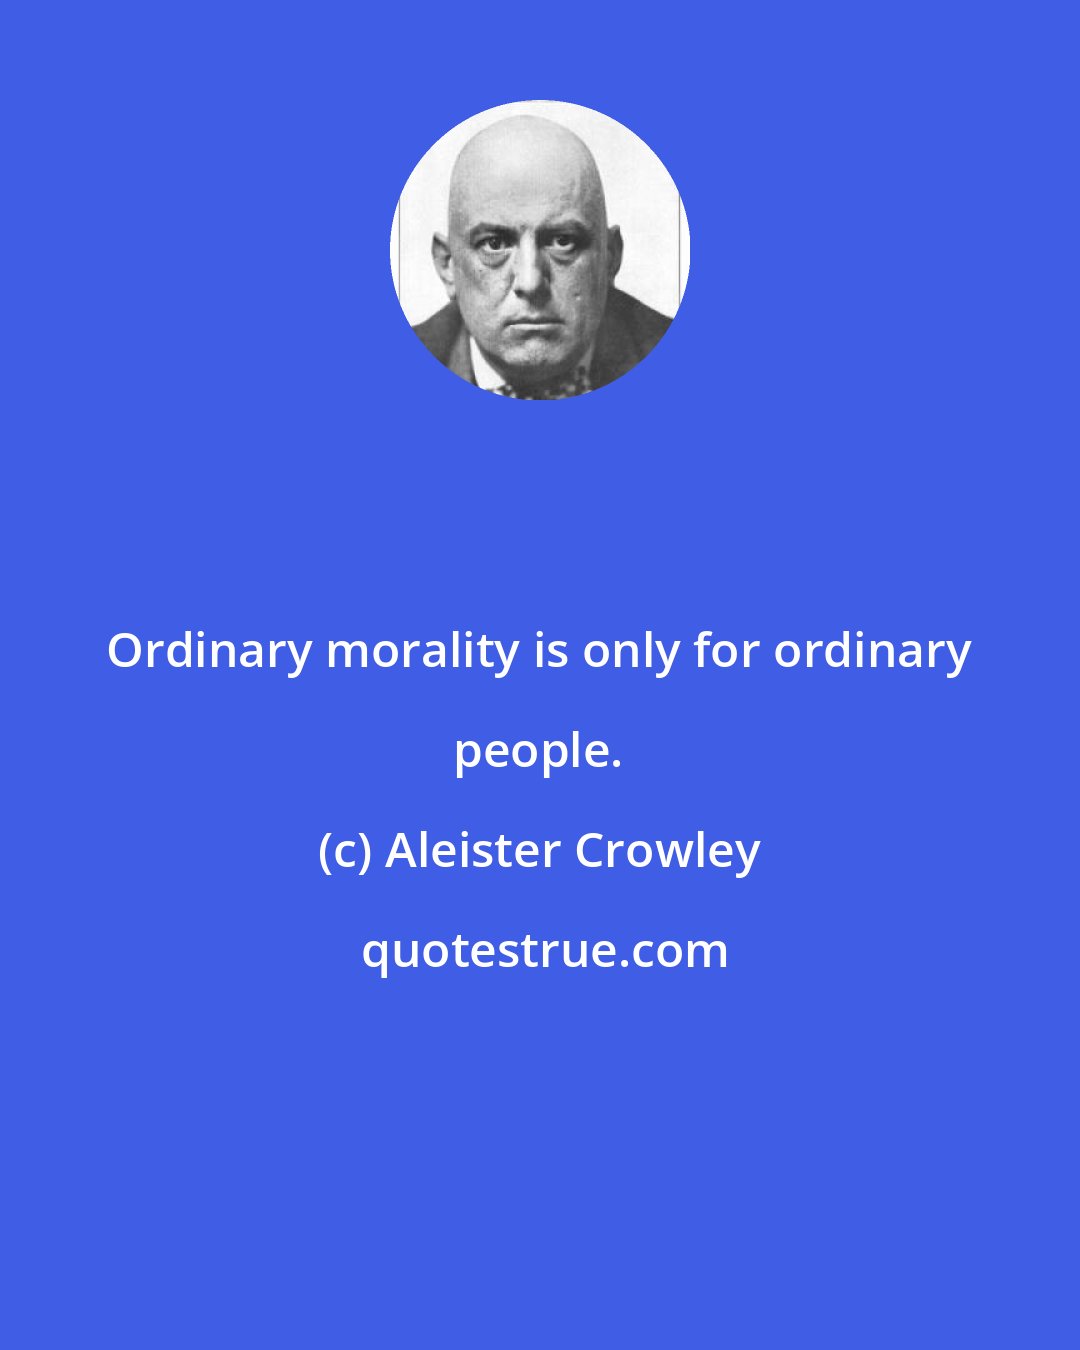 Aleister Crowley: Ordinary morality is only for ordinary people.